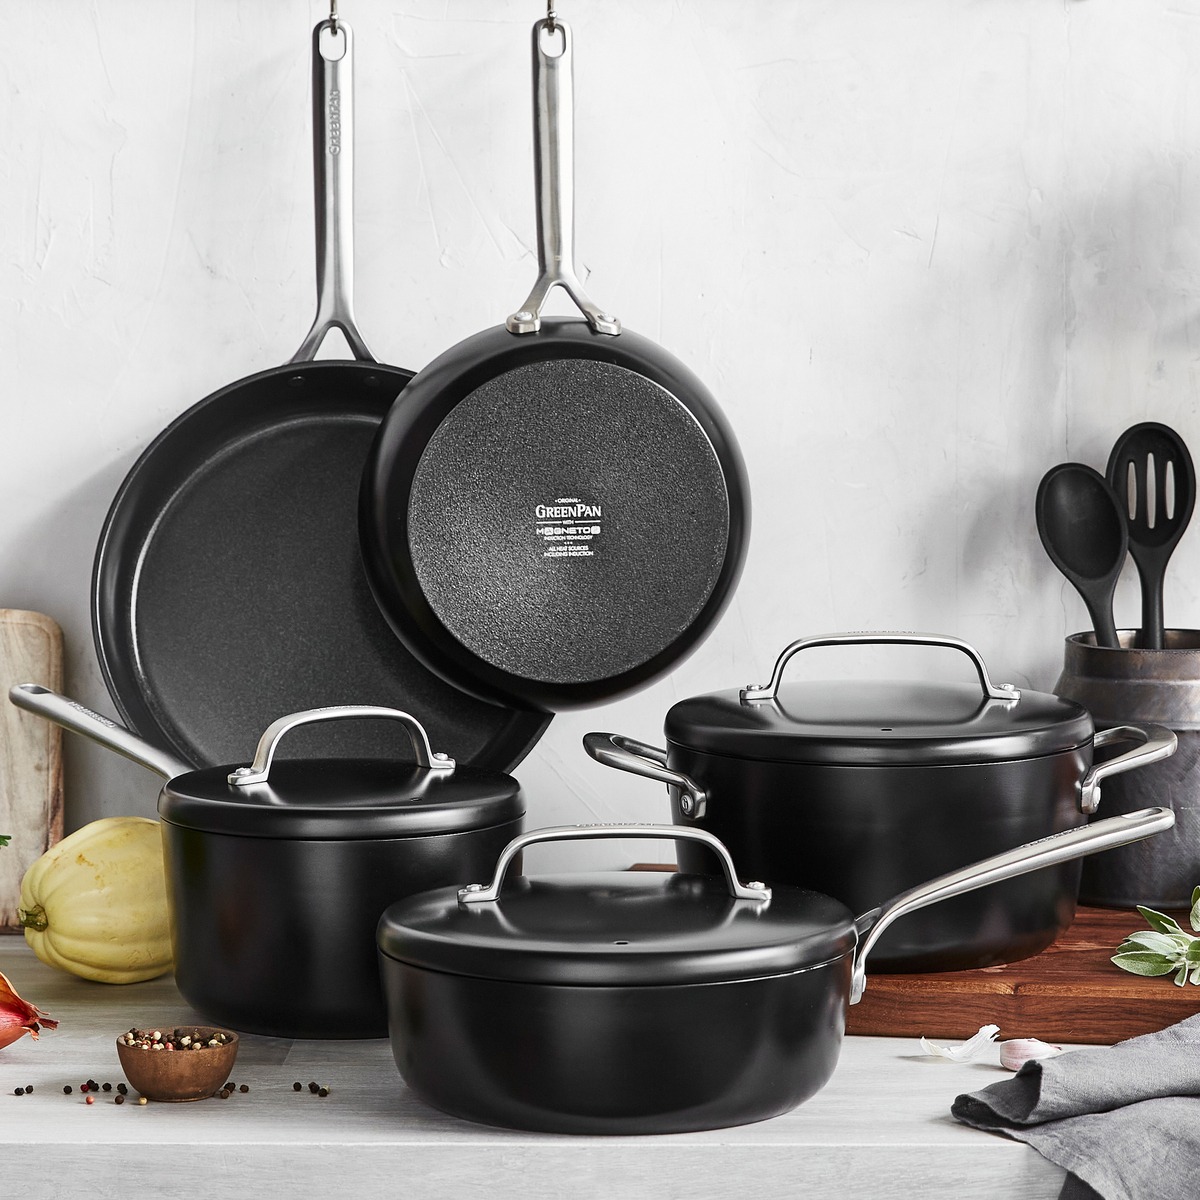  - Shop by Category - Cookware Sets